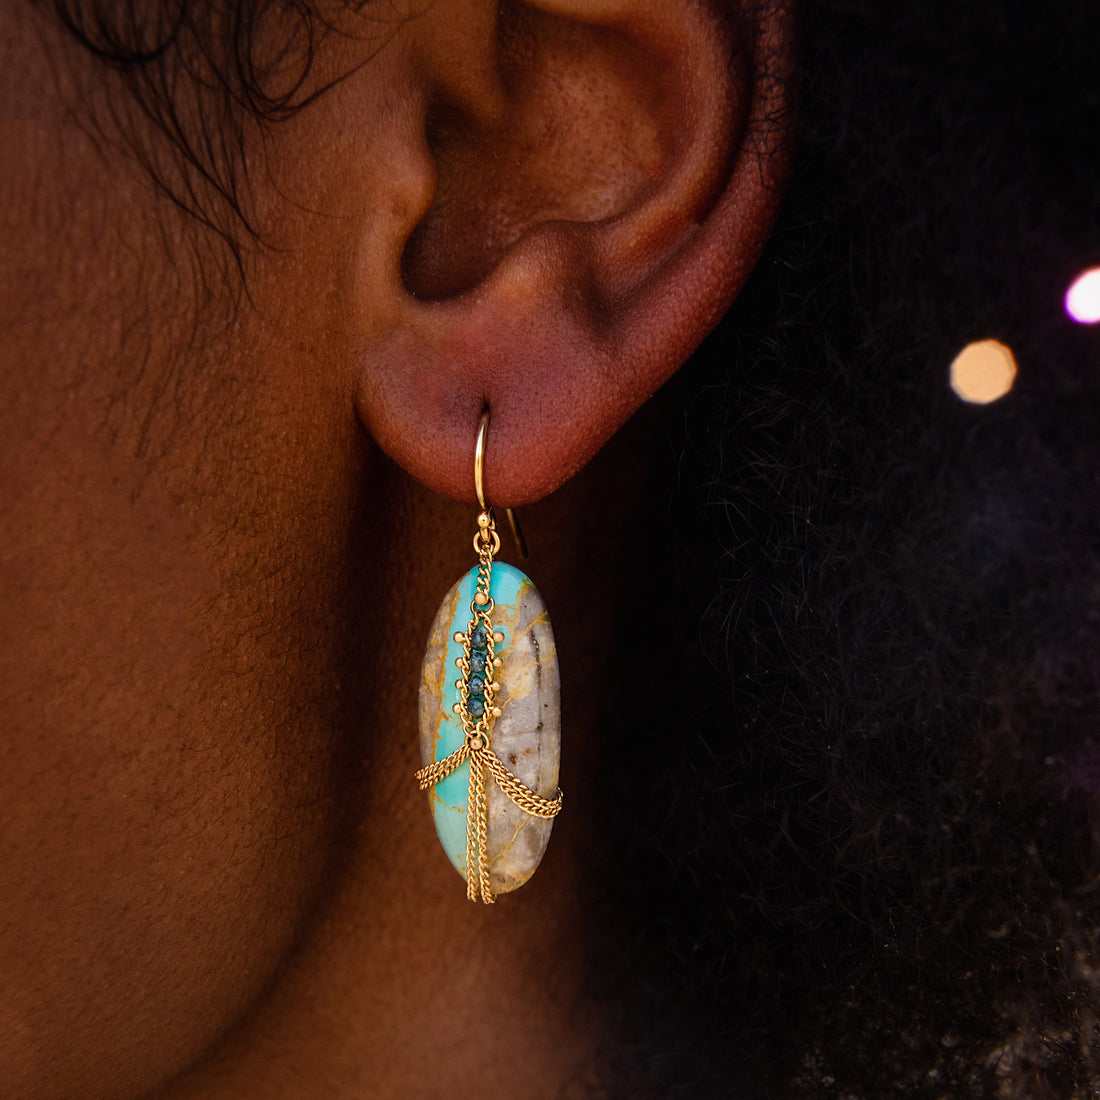 Amali Turquoise Earrings Draped with Gold Chain & Blue Diamonds